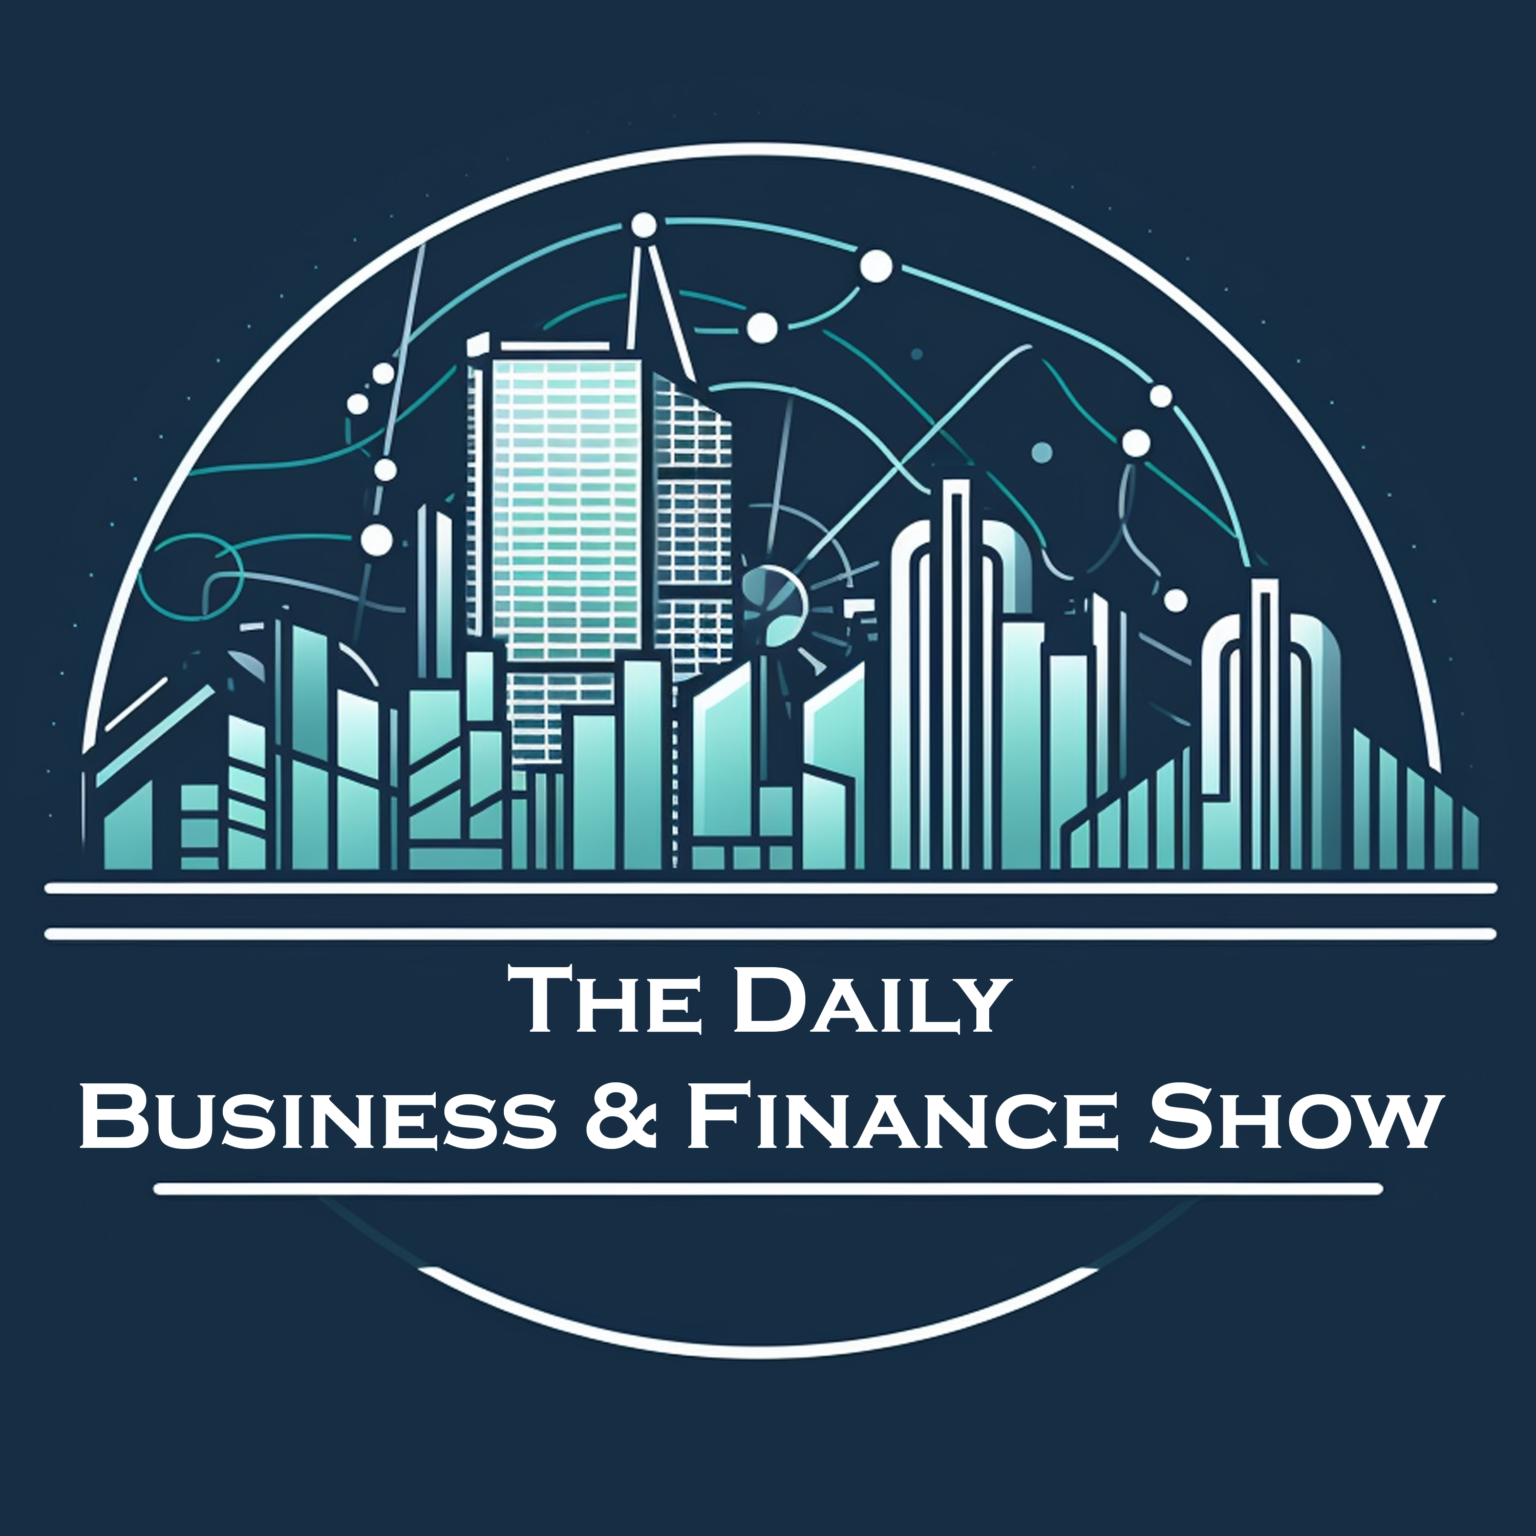 A daily round up of all the business and finance news in bite sized 5 minute episodes. As the name suggests, produced daily!